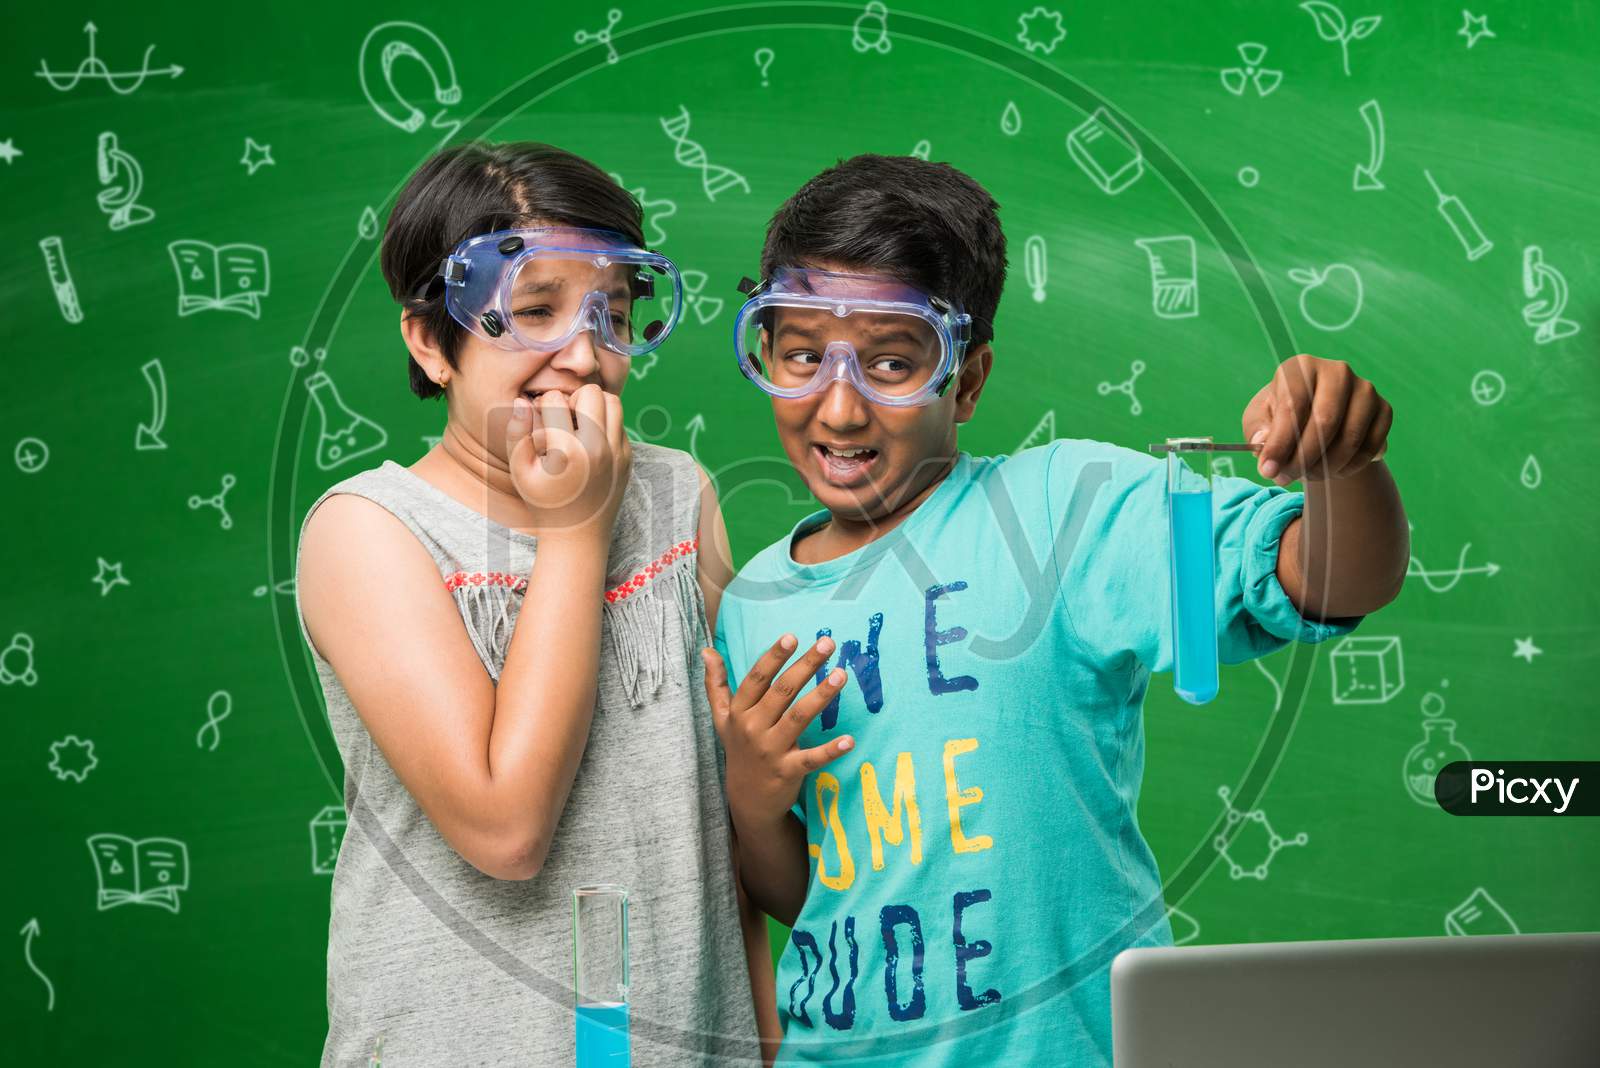 small boy and girl studying science in classroom against green chalkboard background with science doodles